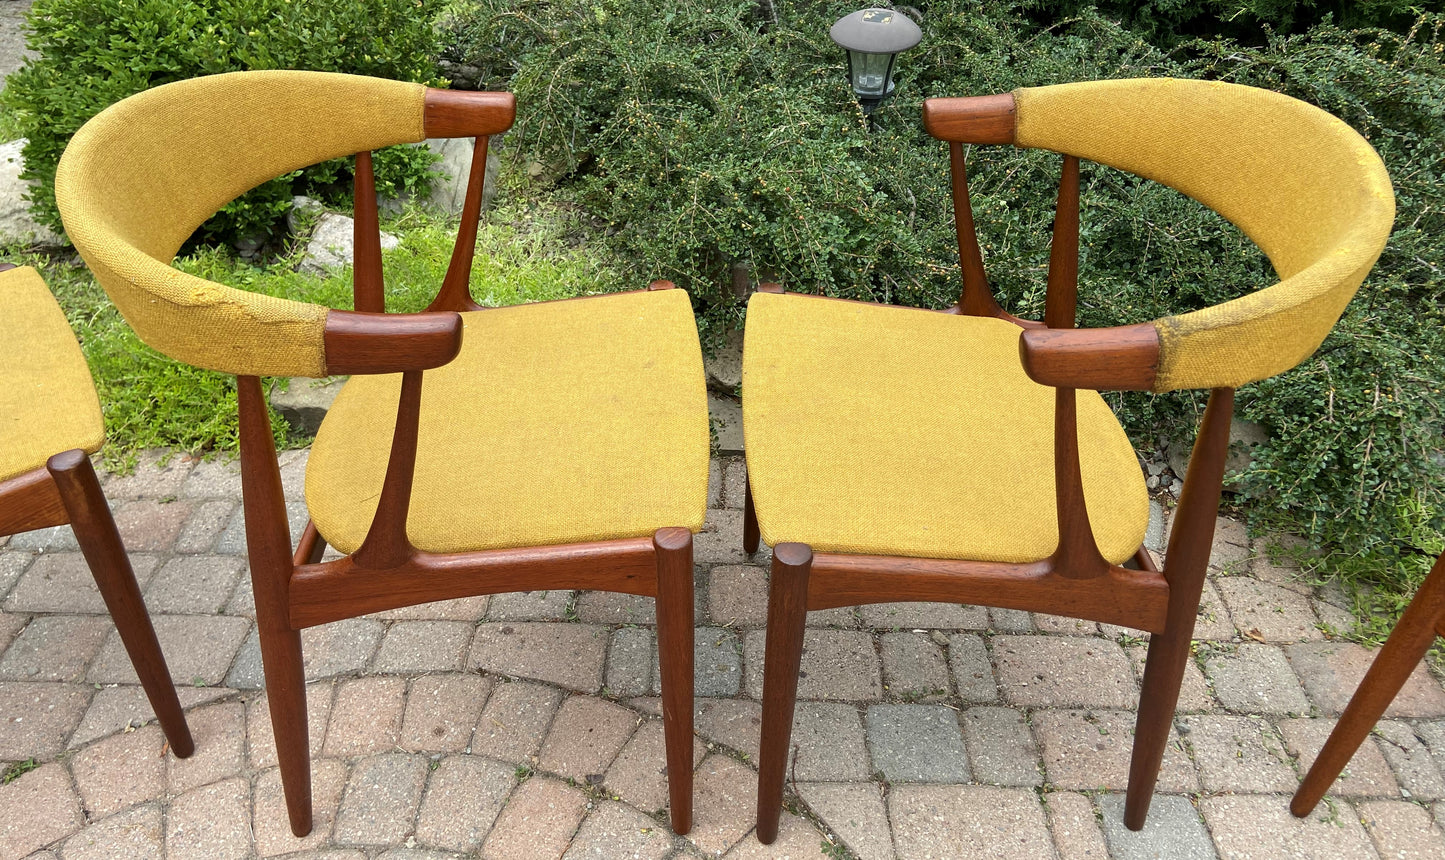 4 REFINISHED will be REUPHOLSTERED Danish Mid Century Modern Teak Armchairs by J.Andersen